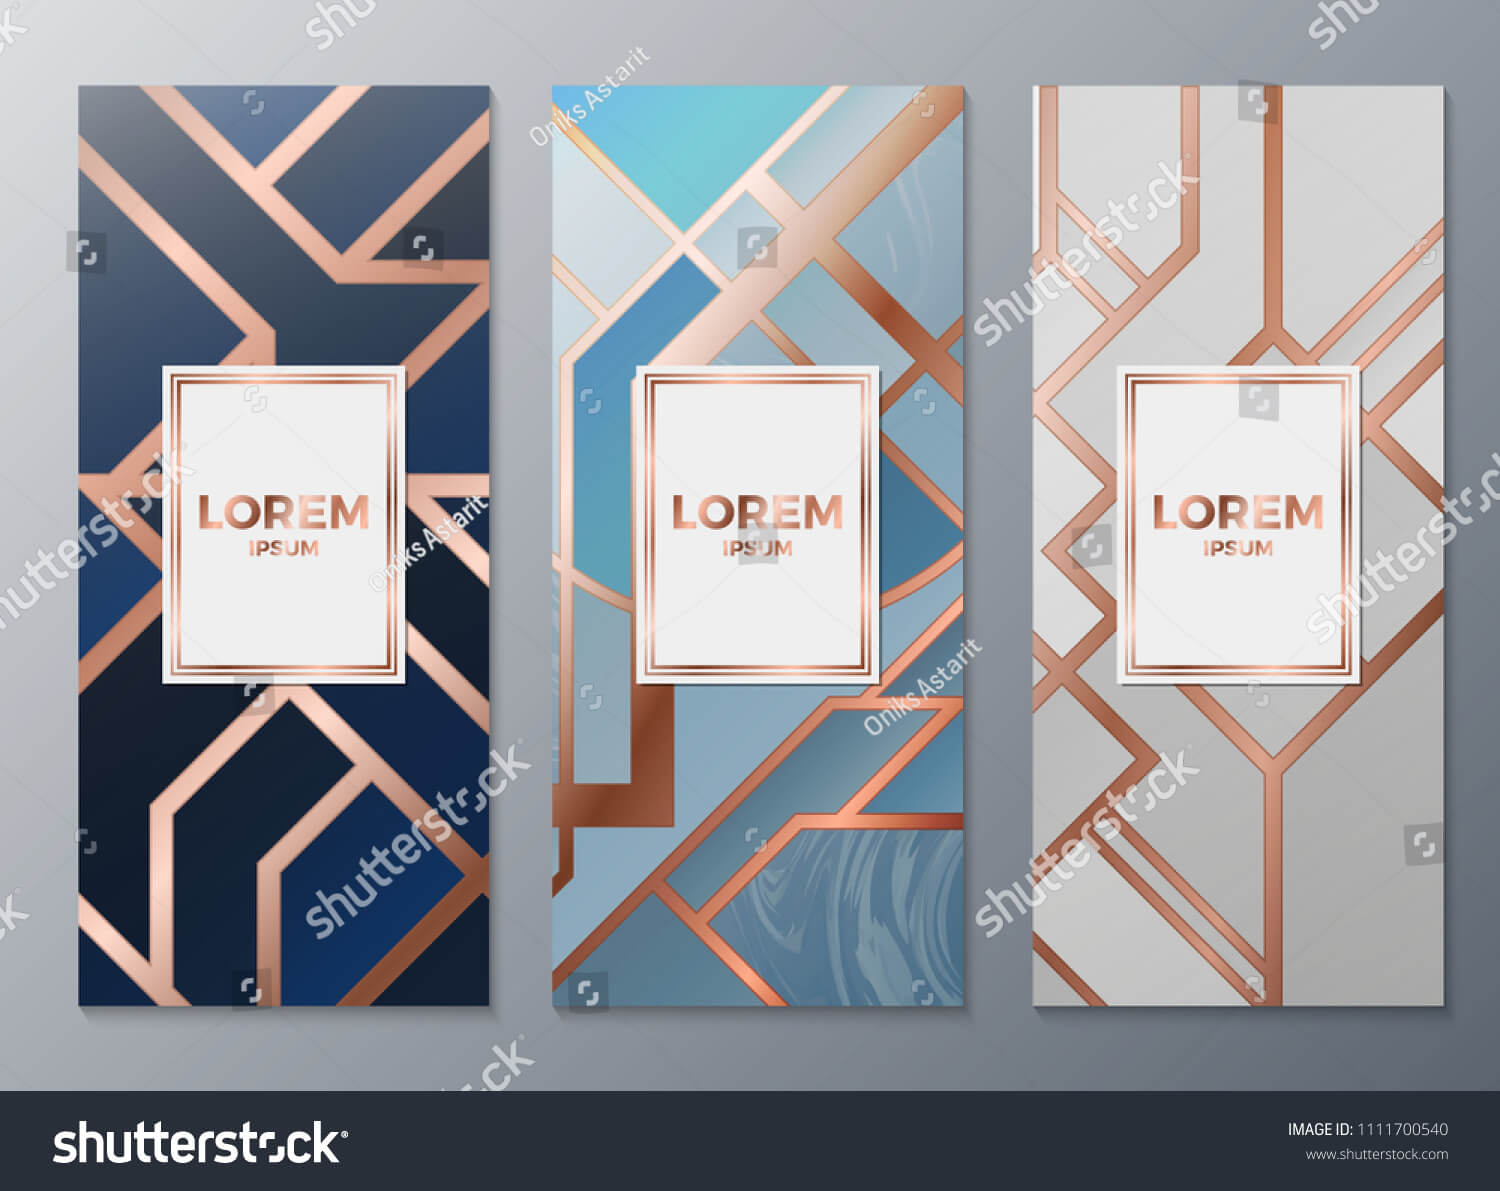 Design Templates Flyers Booklets Greeting Cards Stock Vector Throughout Advertising Cards Templates